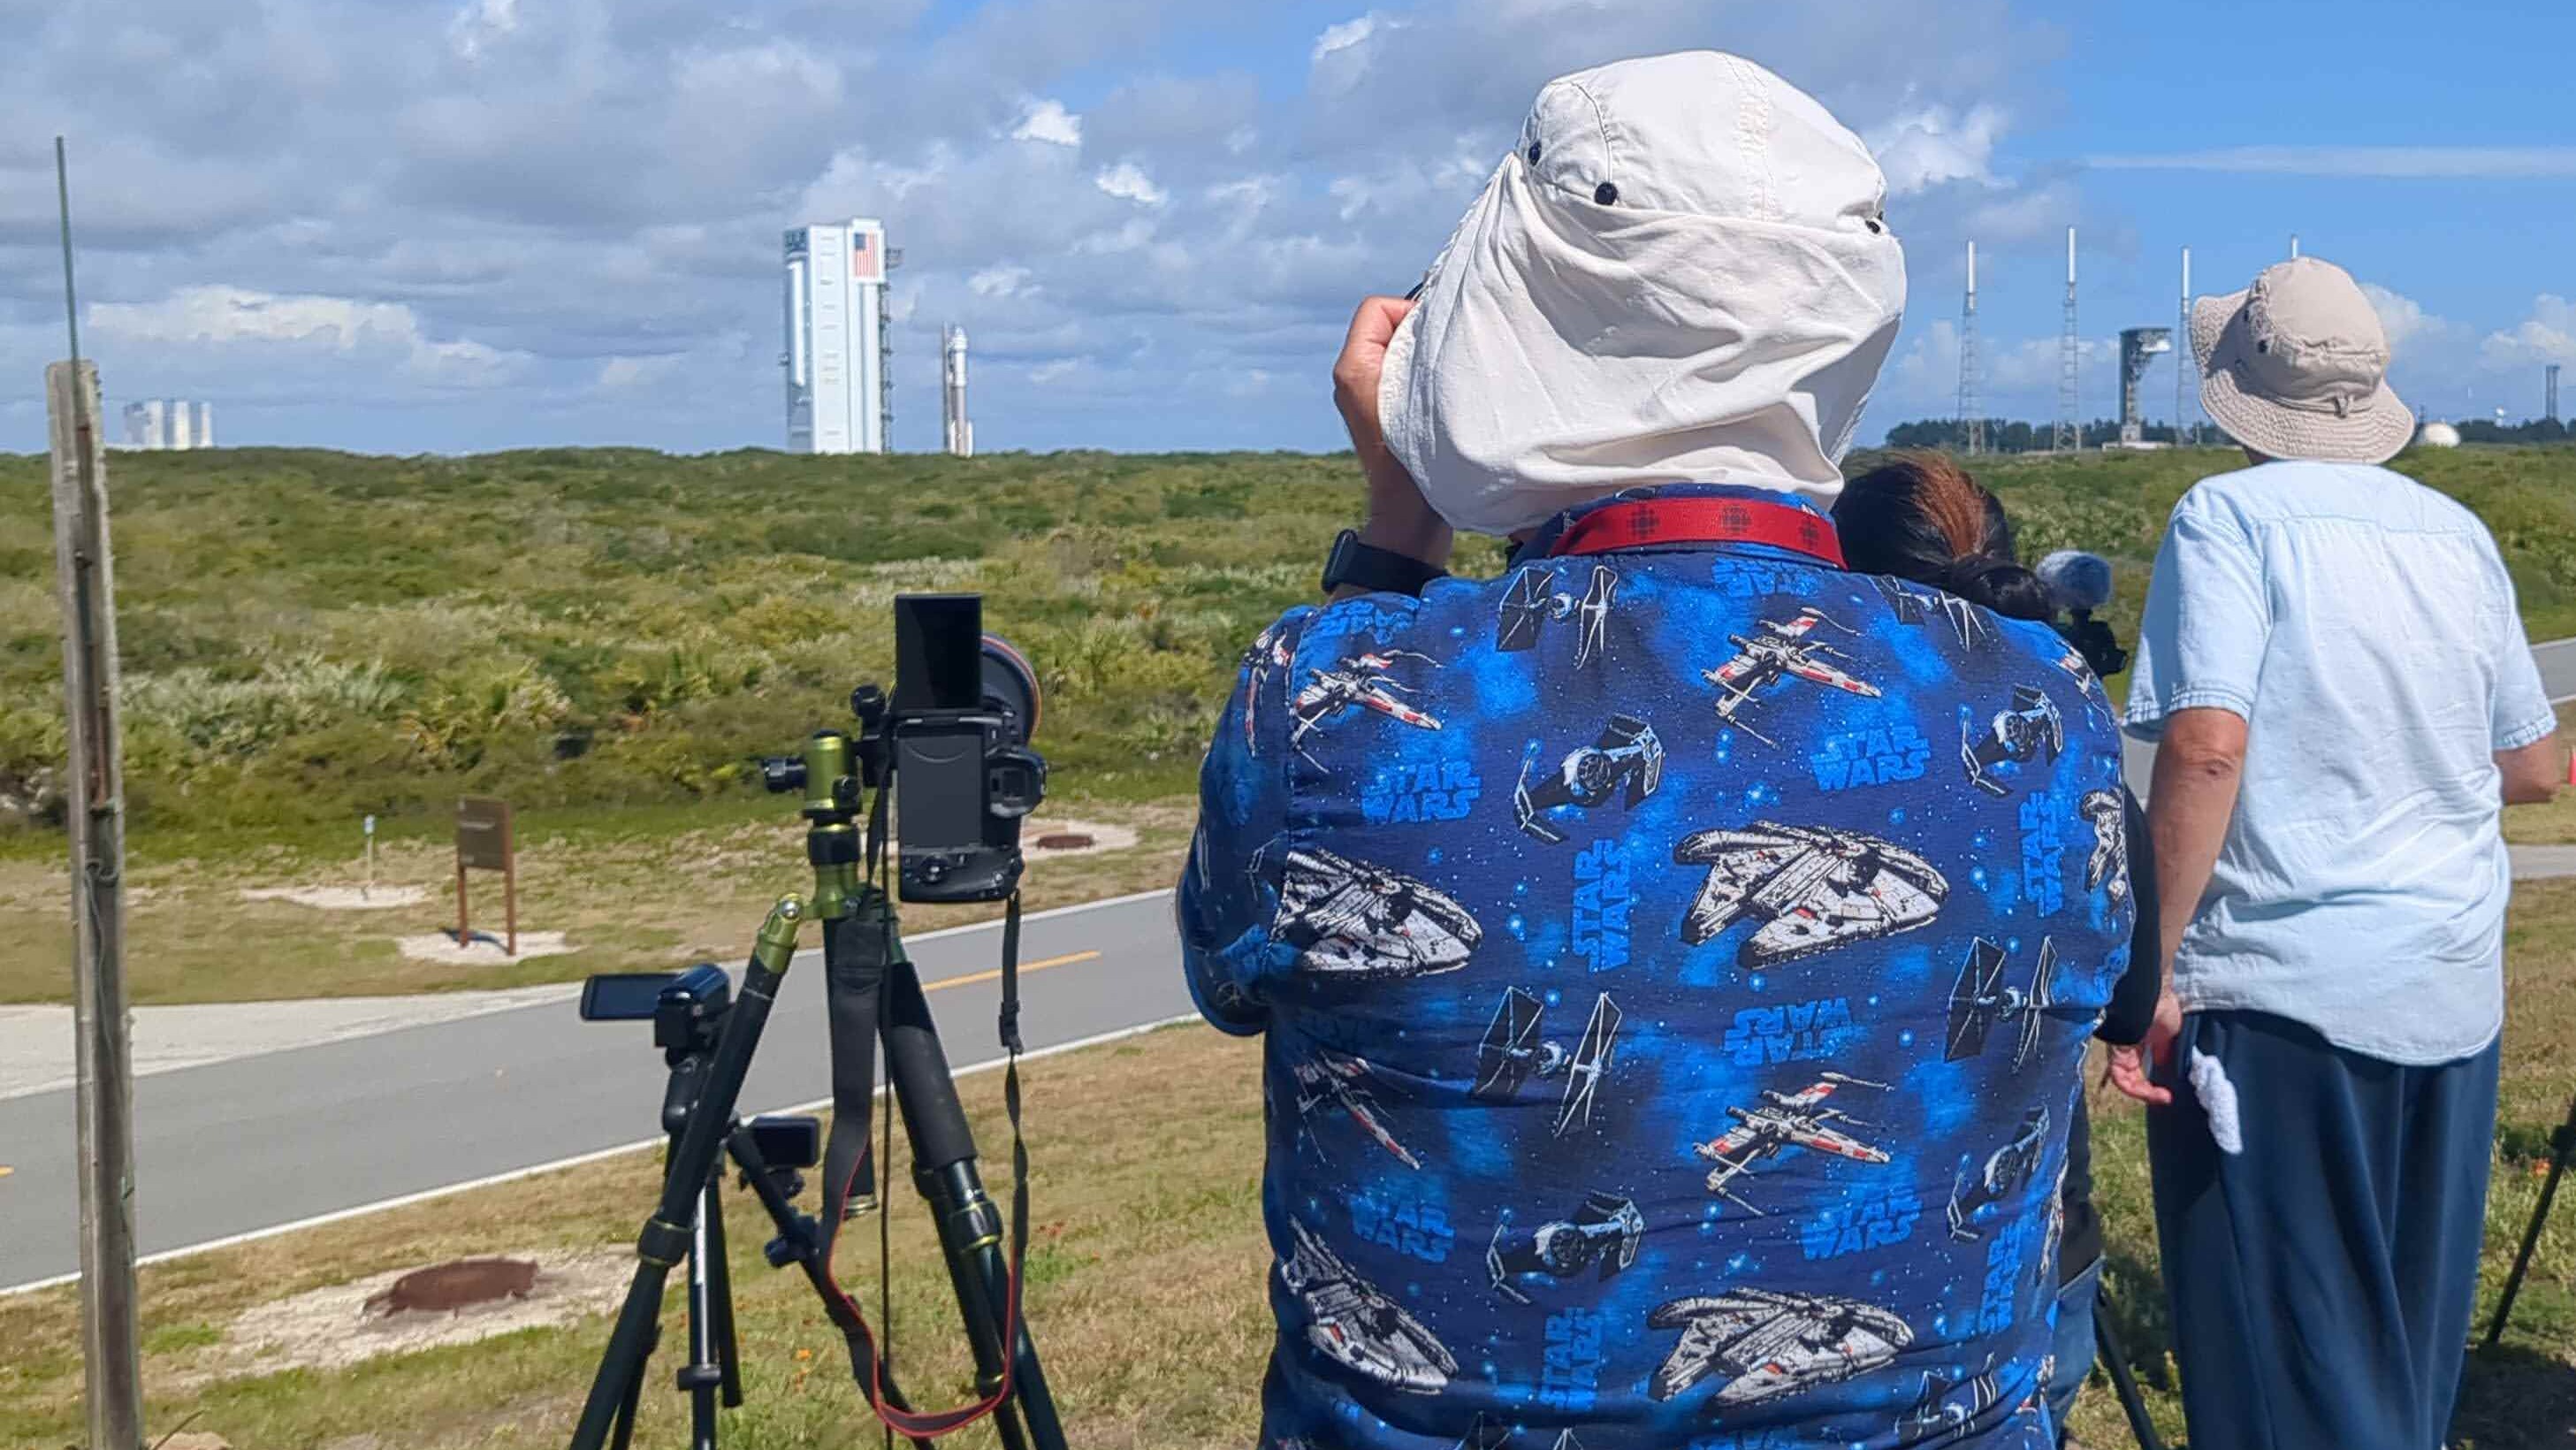 a person in a shirt with stars wars spacecraft facing a rocket and building, far in the background